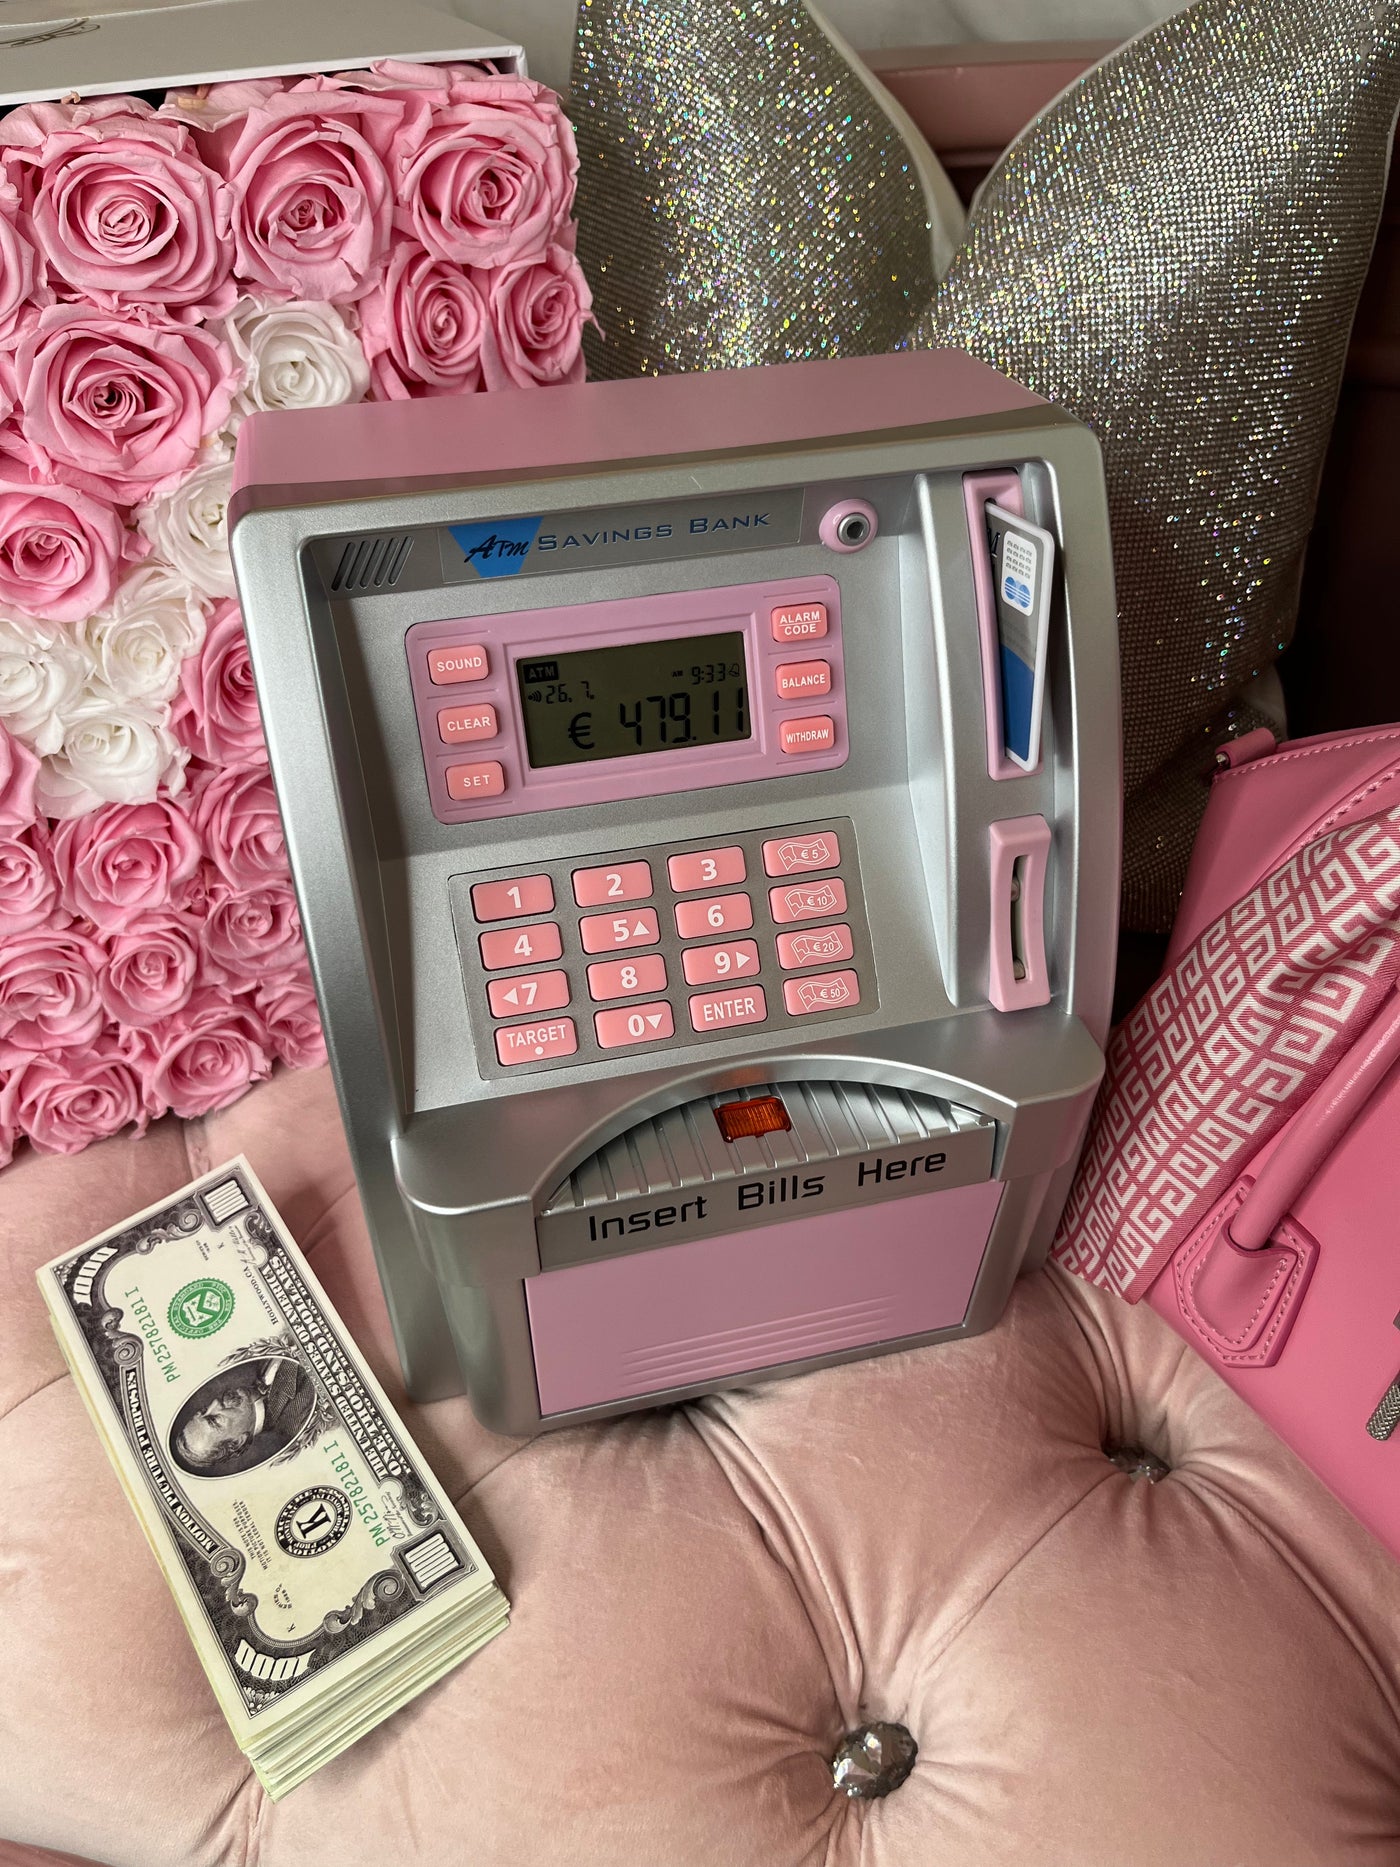 RICH GIRL ATM SAVINGS BANK (PREORDER SHIPS IN 7/10 BUSINESS DAYS)